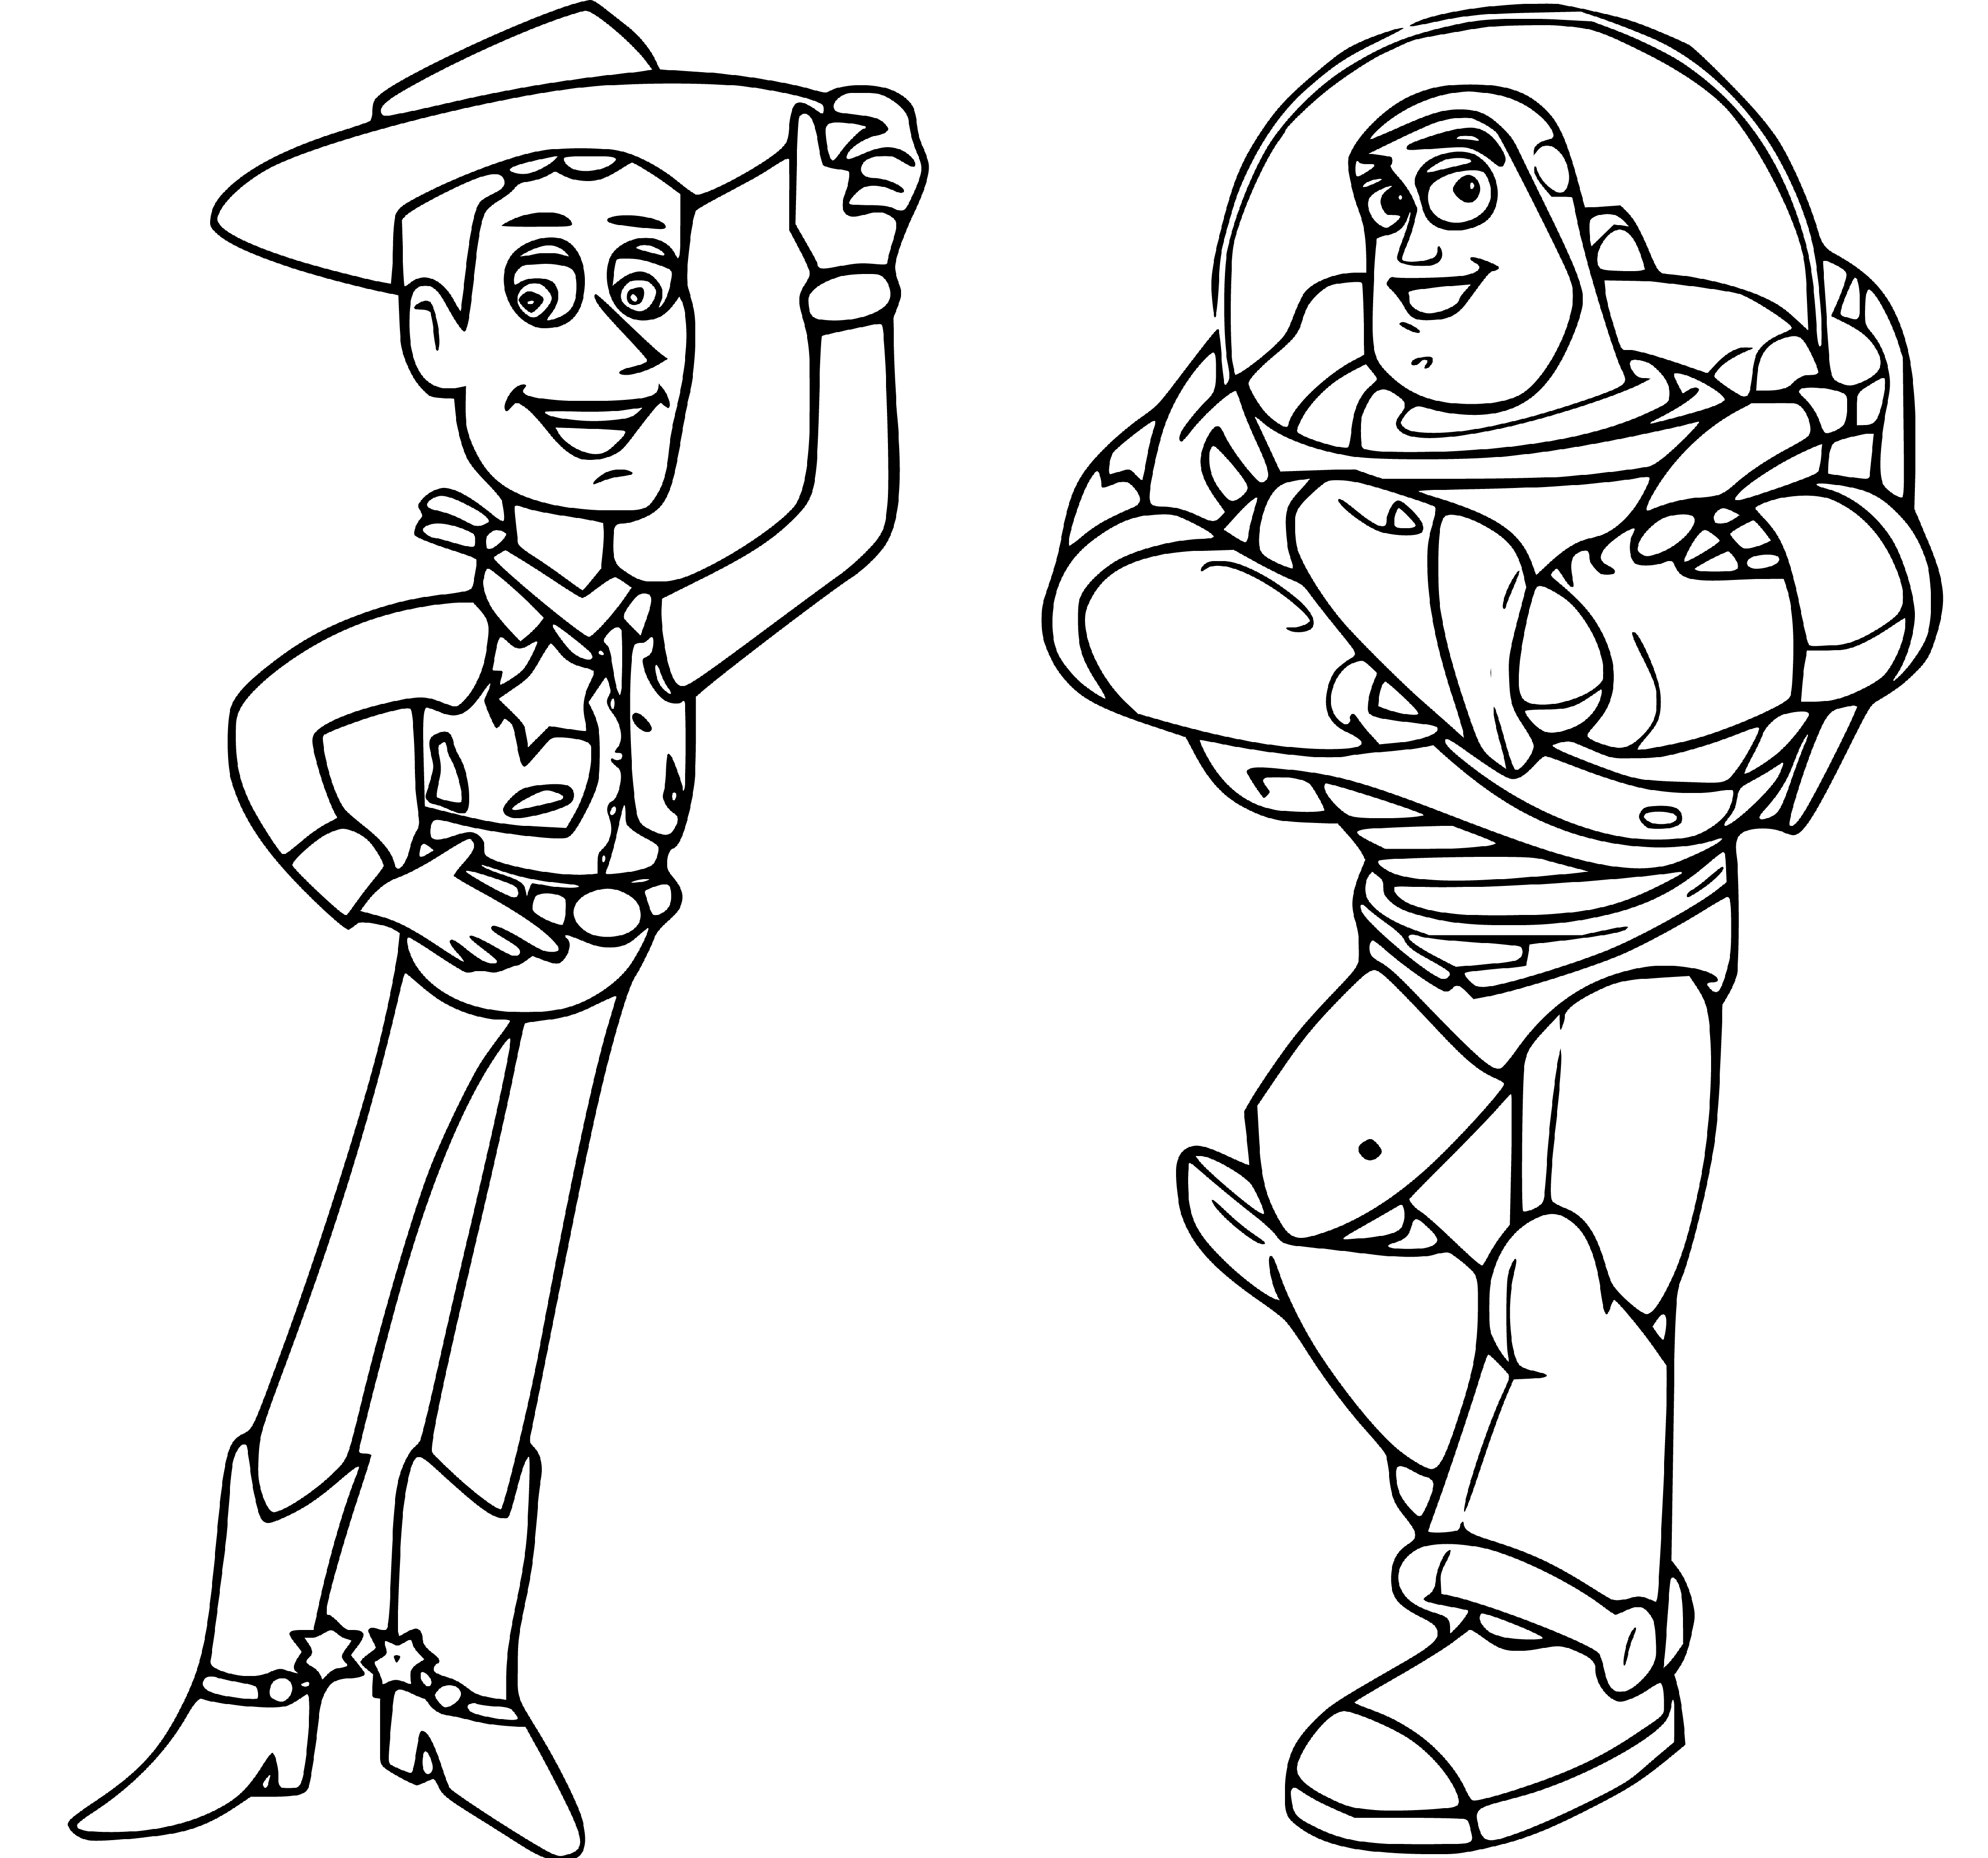 Woody and Buzz Lightyear Coloring Pages - SheetalColor.com